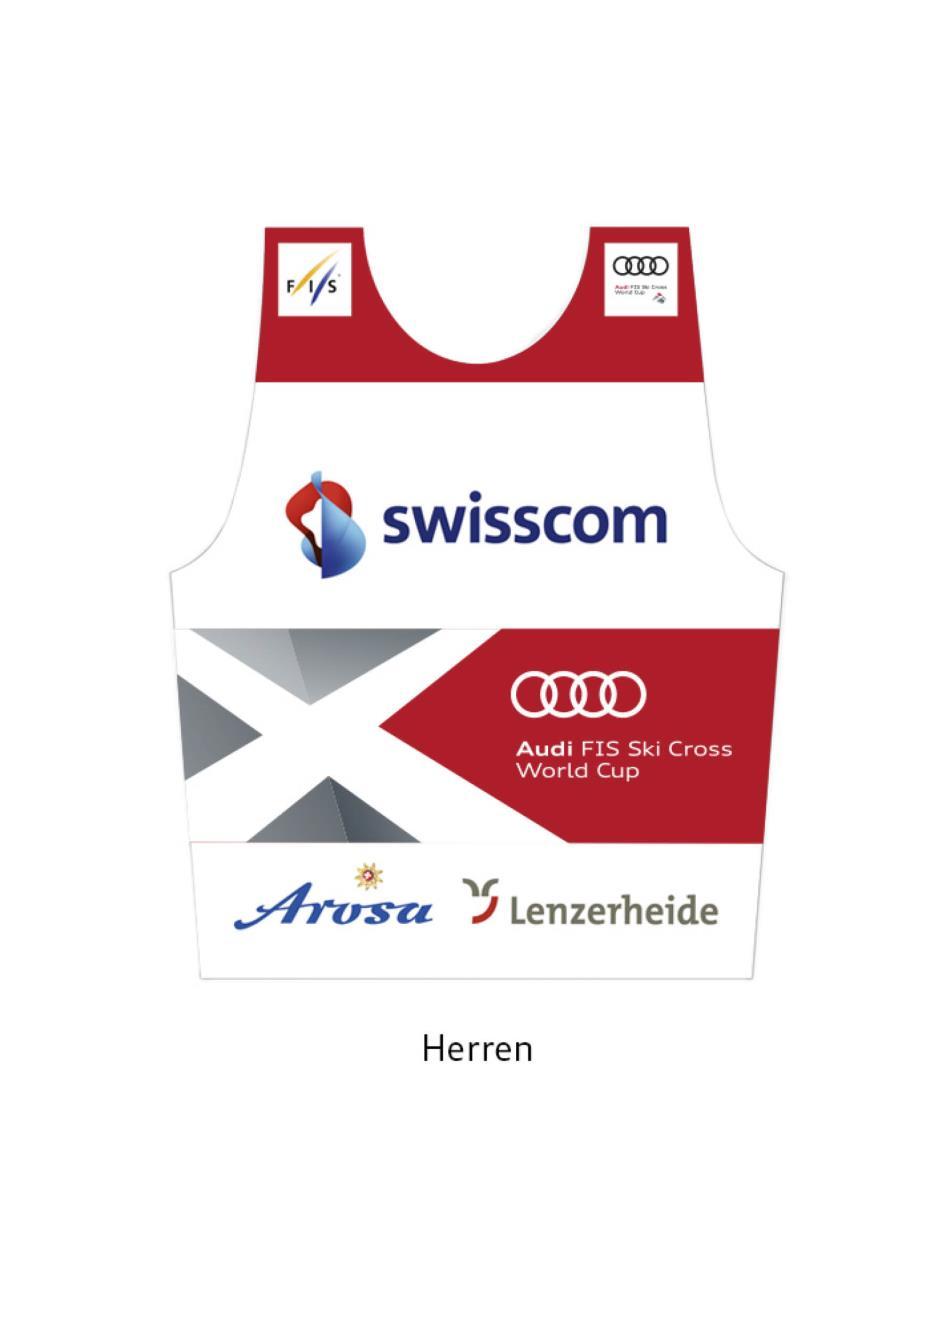 4.4 Leader bib Leader bib The leader of the overall Audi FIS Ski Cross World Cup will wear a red leader bib during the race and winner s award ceremony. This bib will be produced by FISMAG.